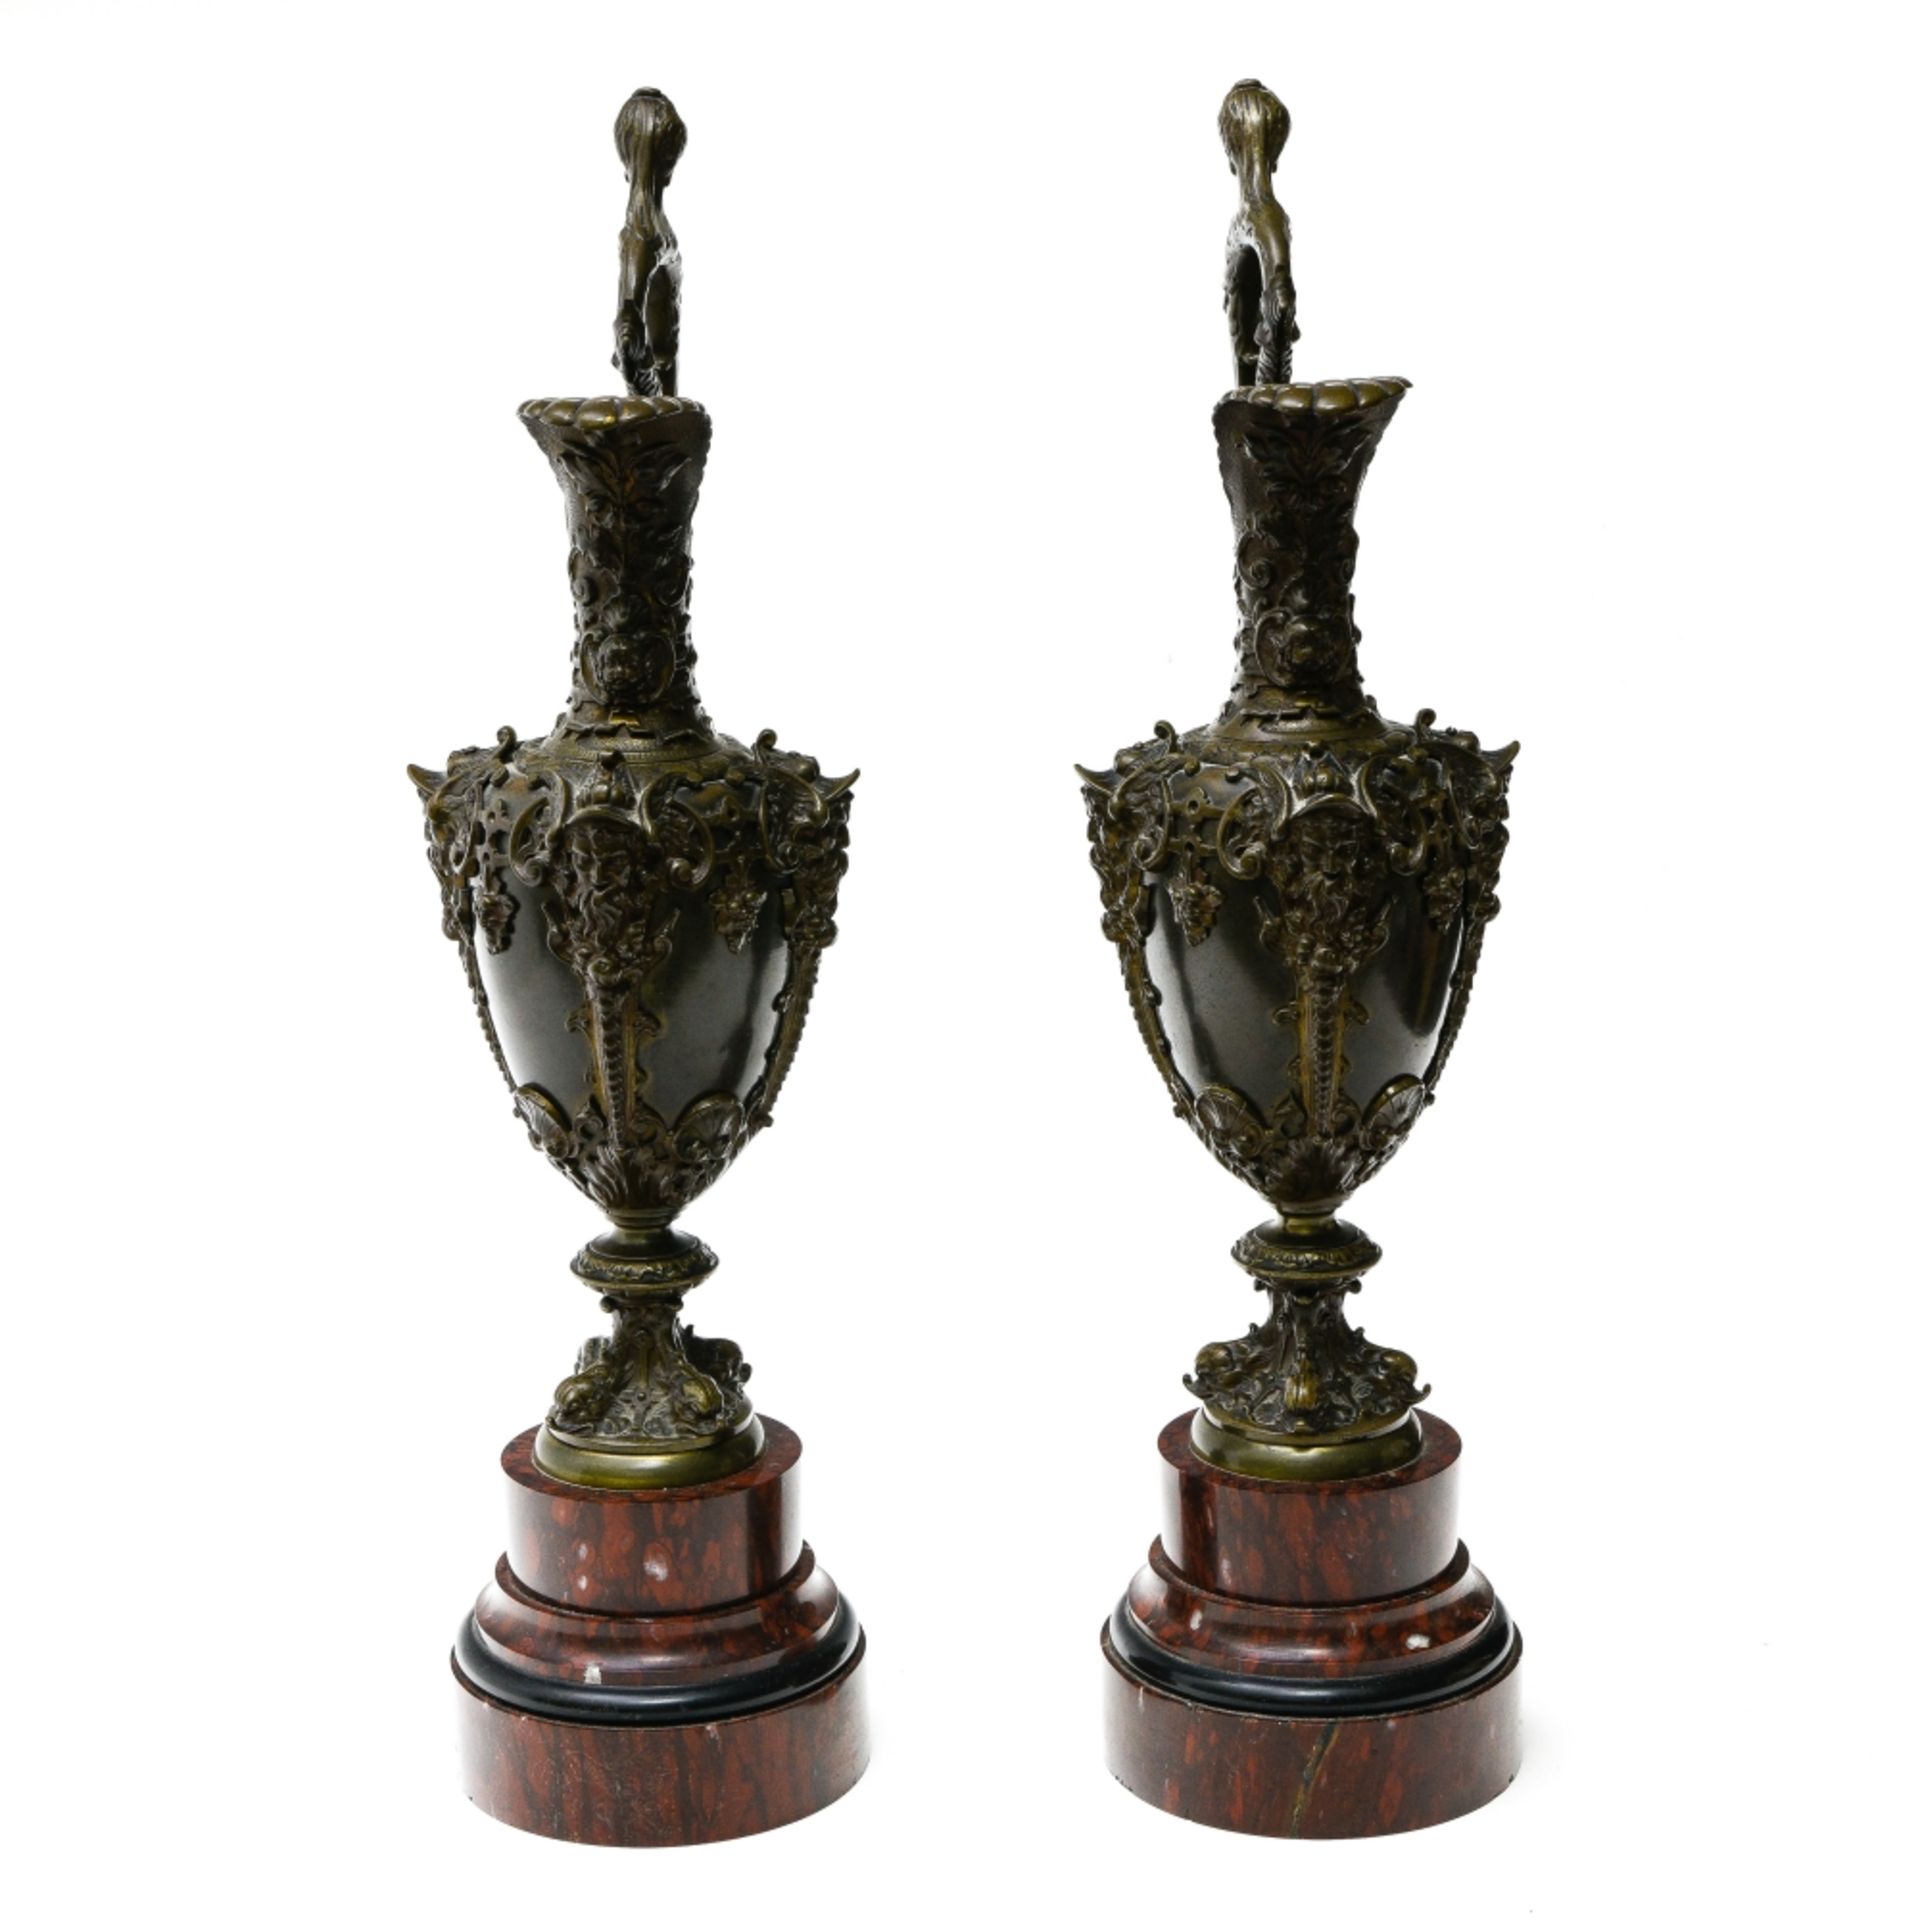 Large pair of ewers 19TH CENTURY WORK Bronze with brown patina, on cherry-red and black marble base. - Image 2 of 2